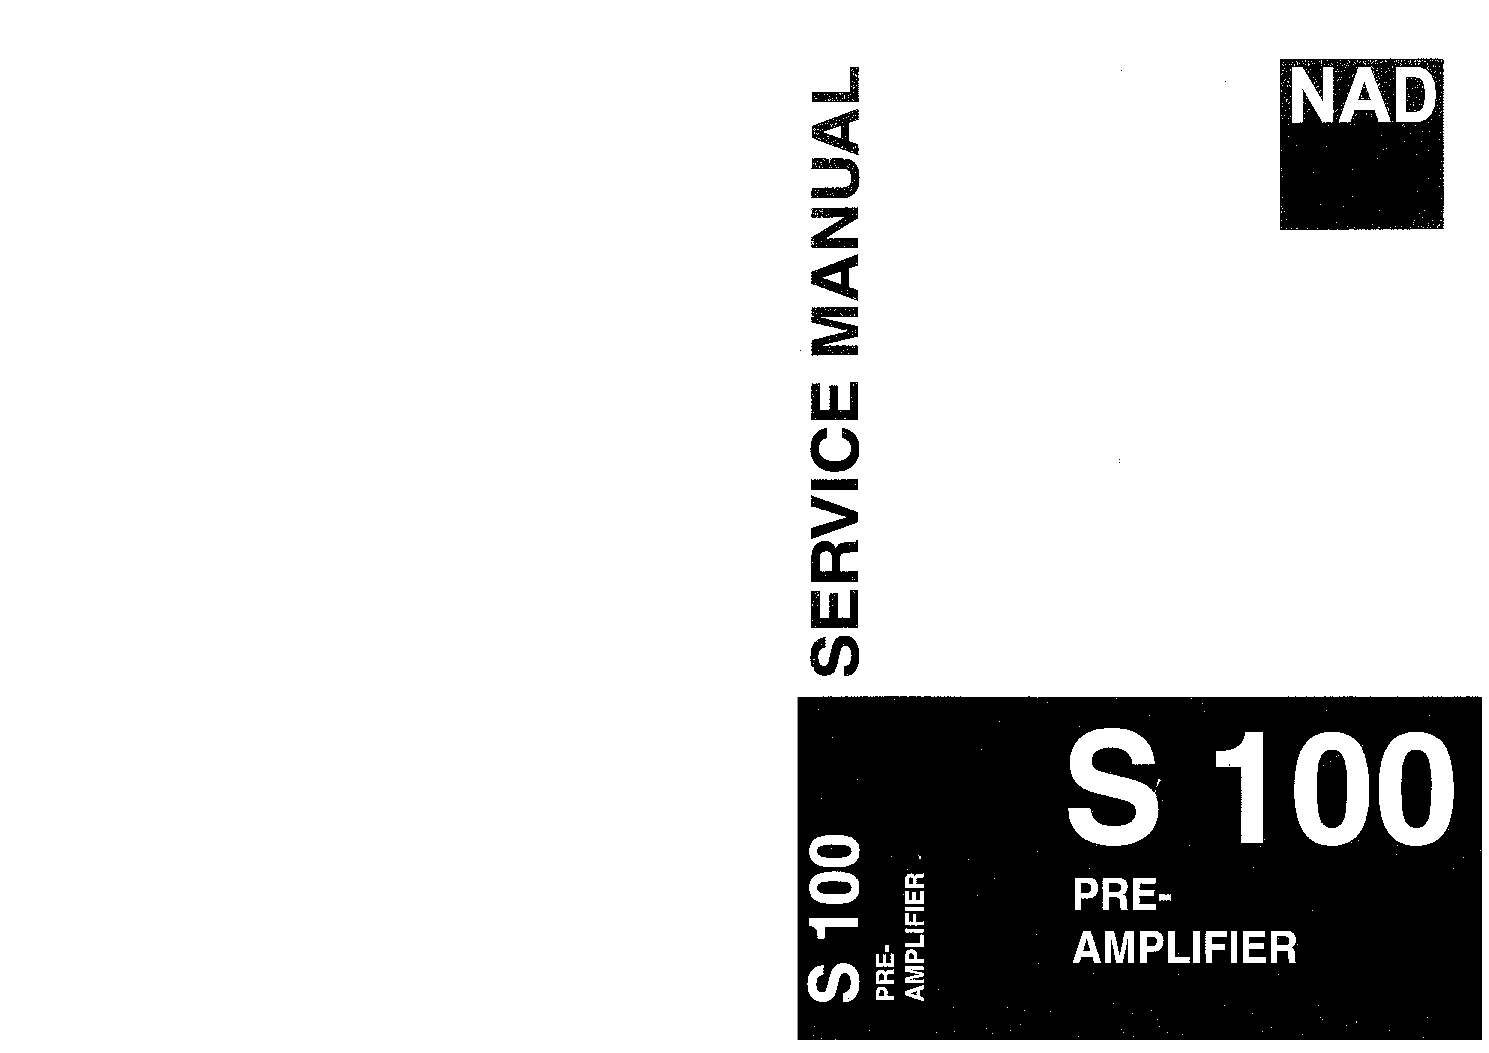 NAD S100 SM service manual (1st page)